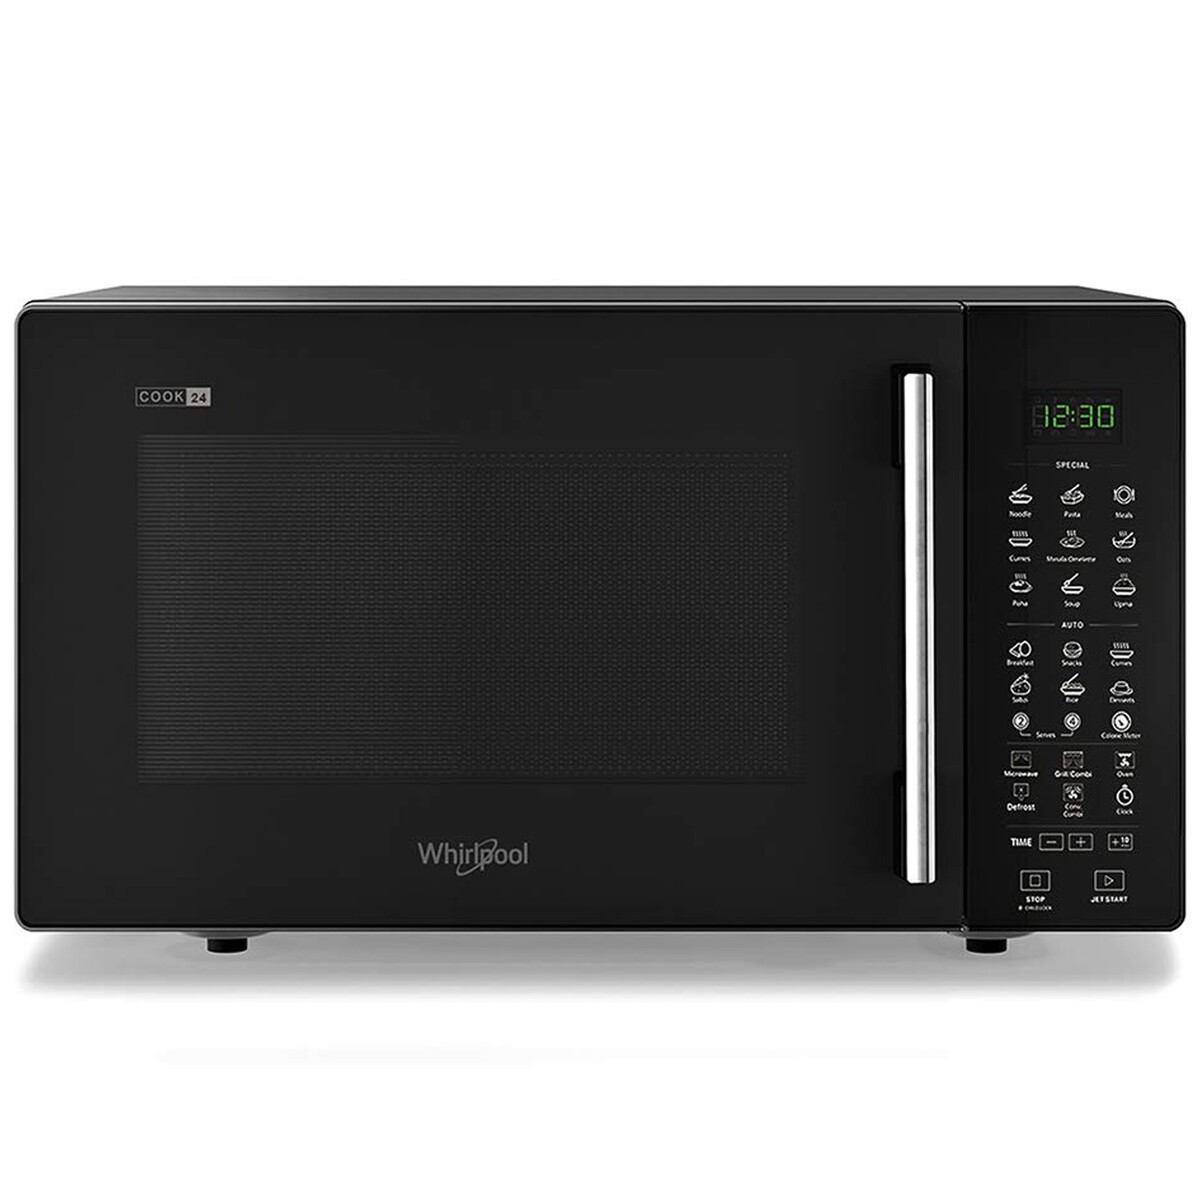 Whirlpool Microwave Oven Magicook Pro 26CE Black 24 Litre